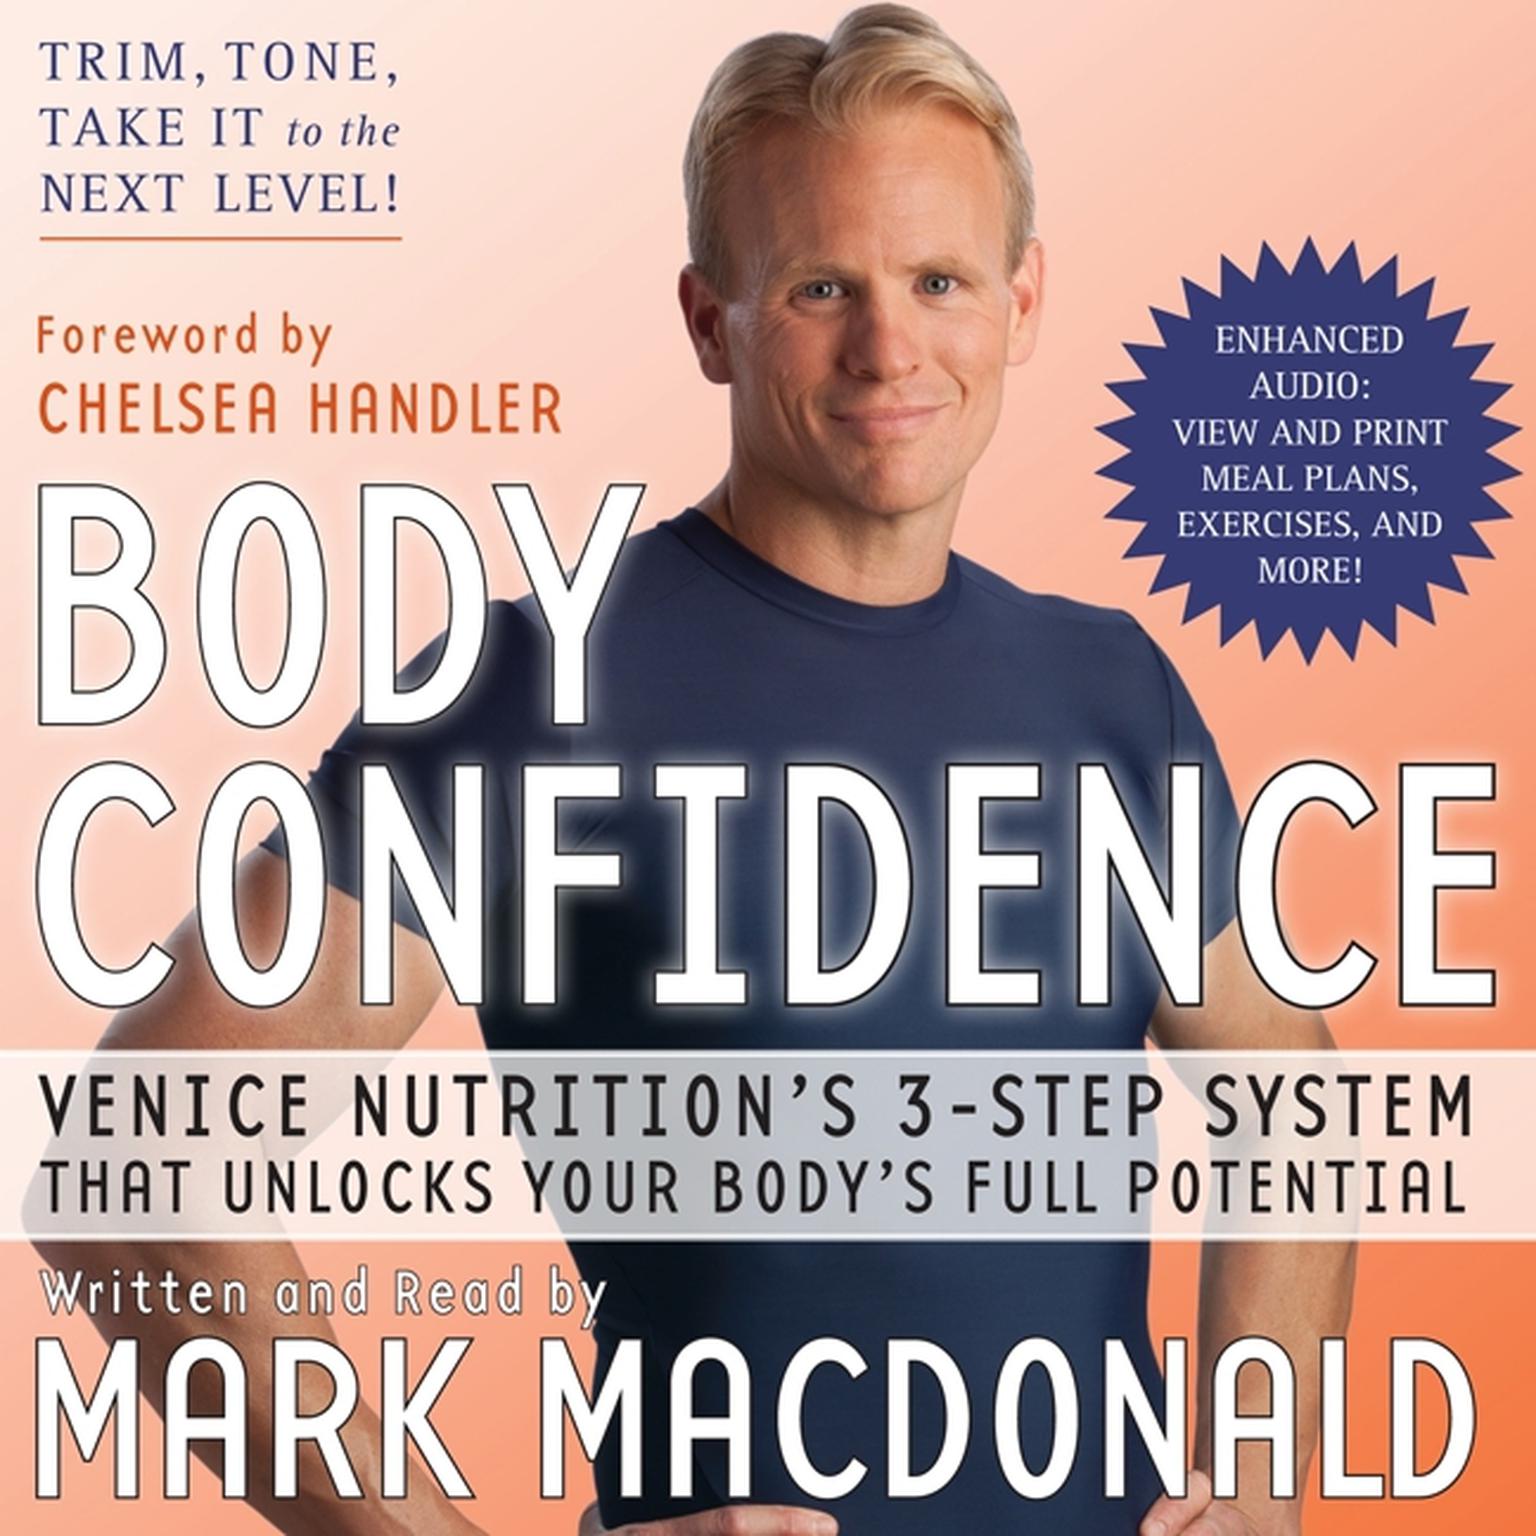 Body Confidence: Venice Nutritions 3 Step System That Unlocks Your Bodys Full Potential Audiobook, by Mark Macdonald